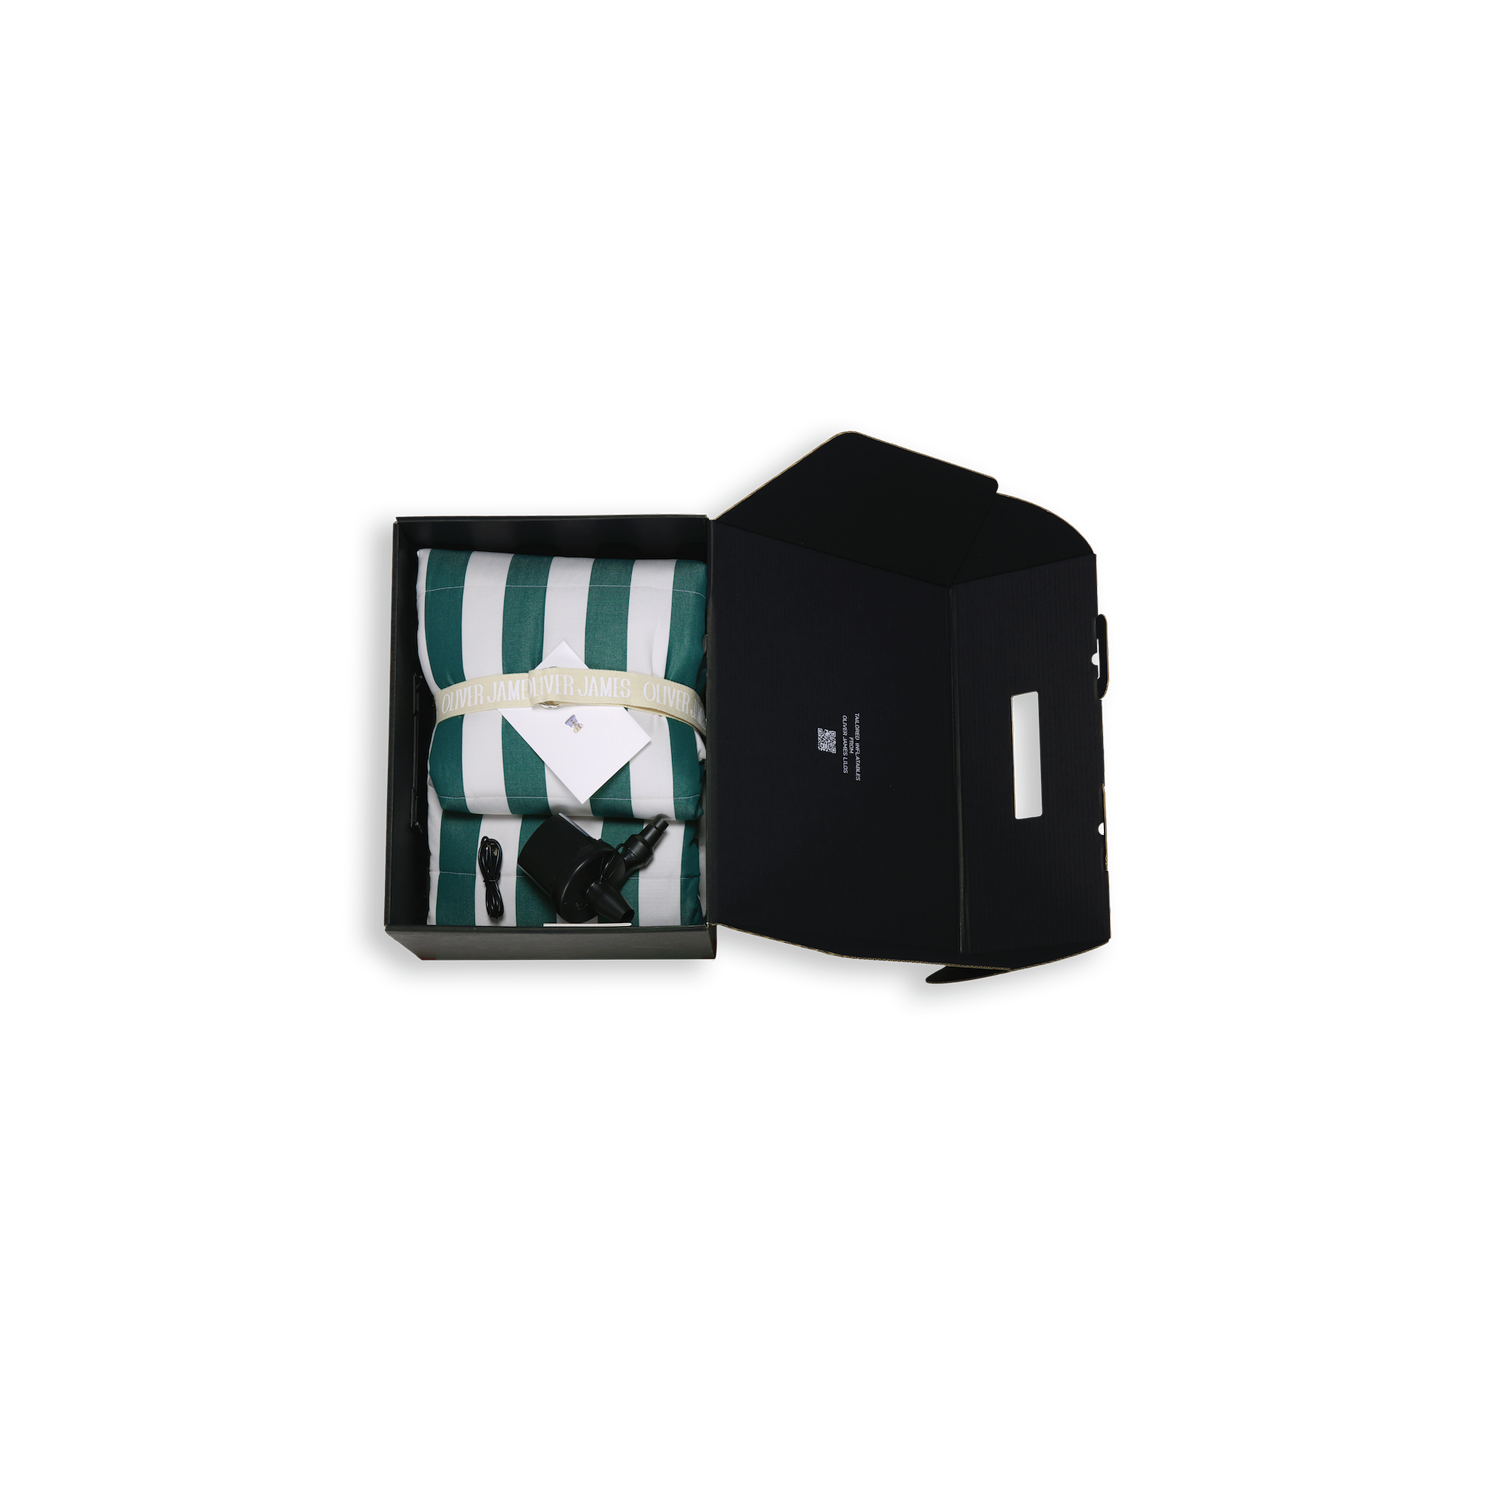 A single green and white stripe inflatable luxury pool float lounger folded in black box box with a belt, card and pump.